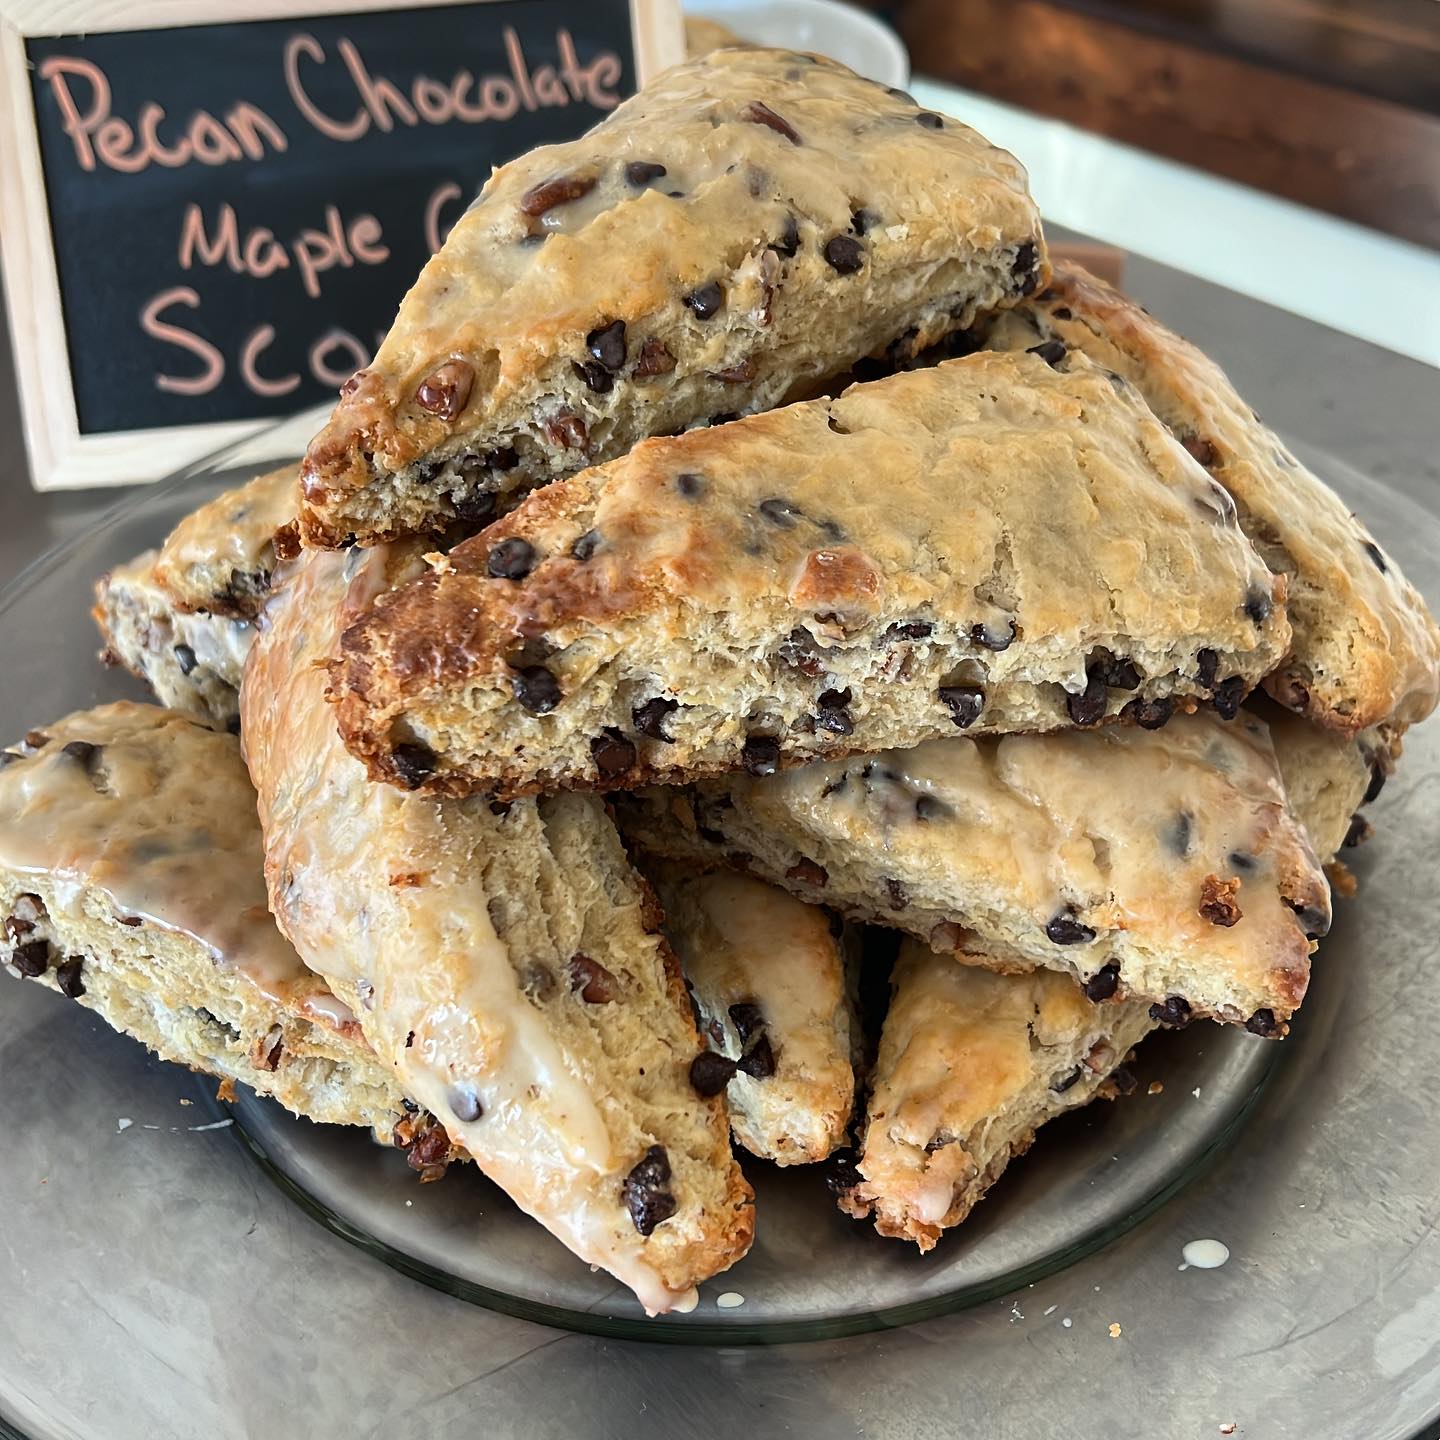 Chocolate-Chip-Pecan-Maple Scones at Cafe 2.0 in Port Orford, Oregon